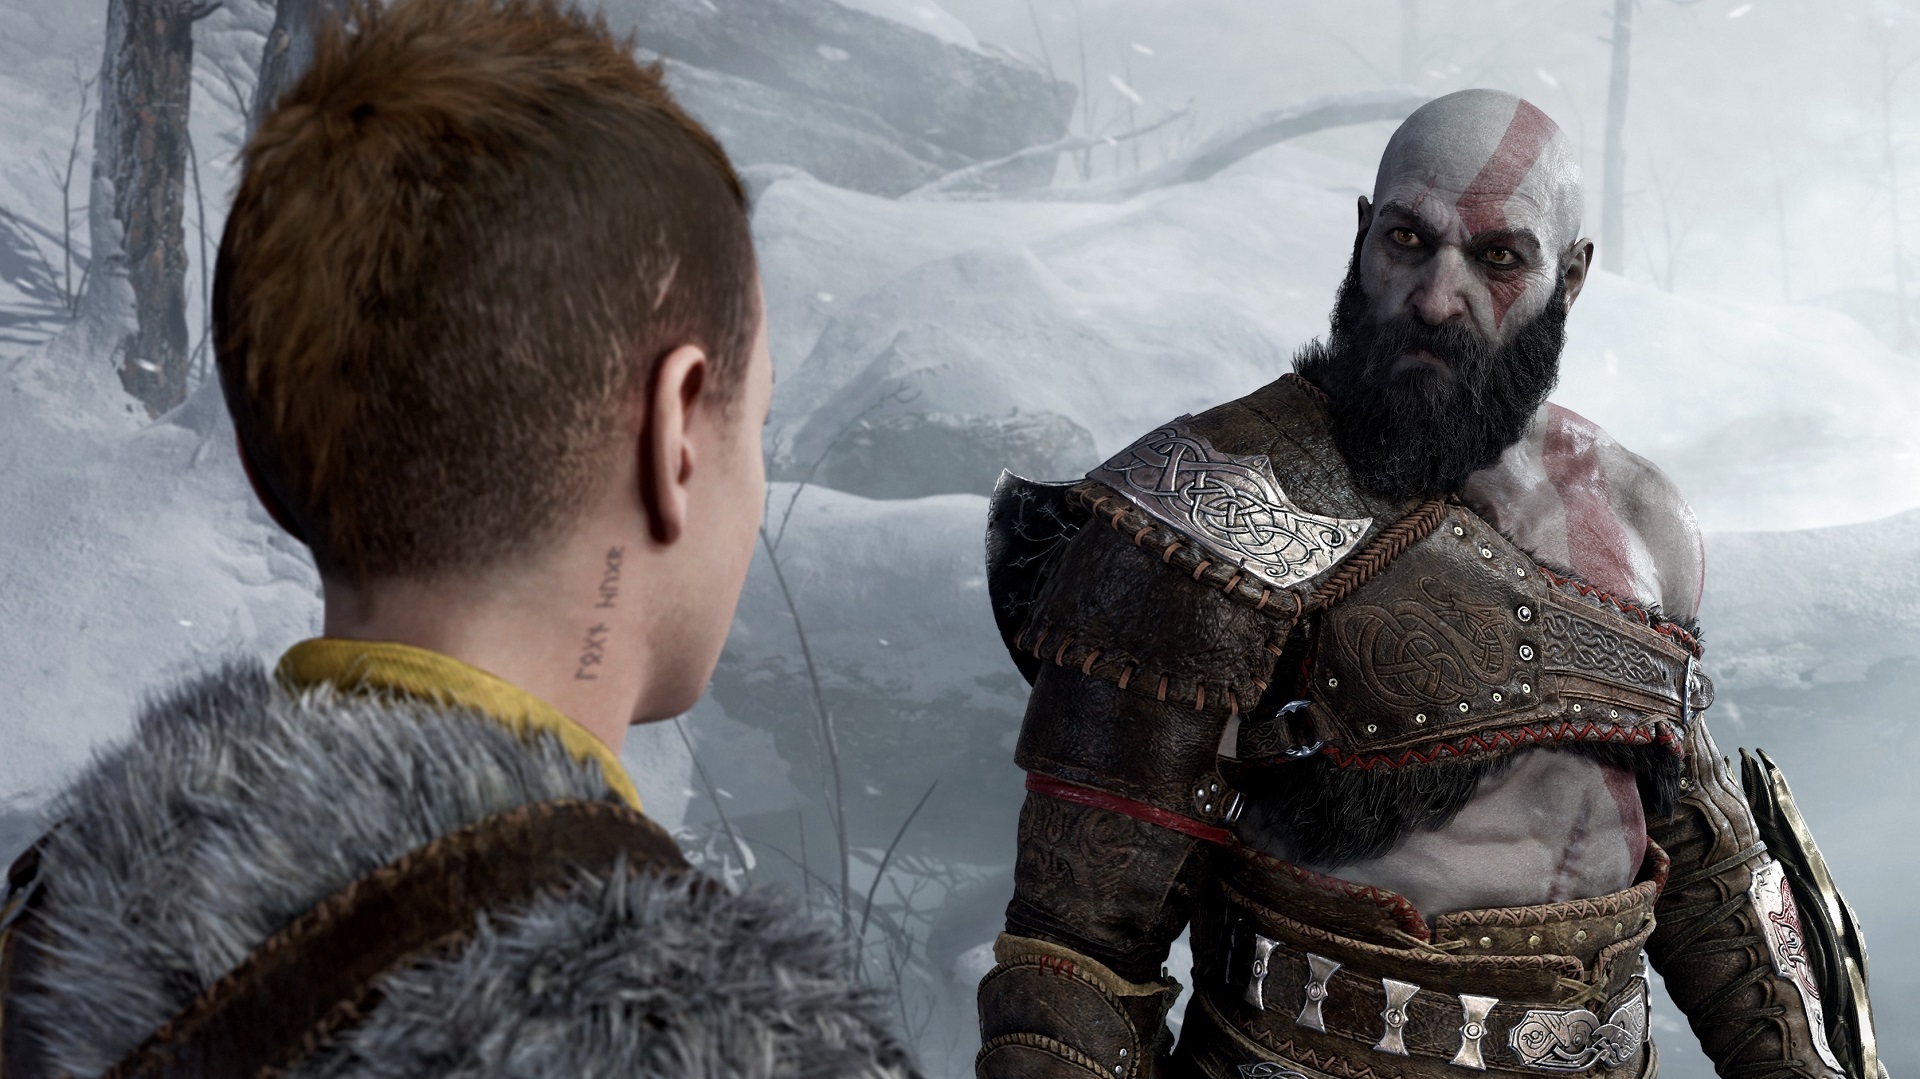 Sony is considering a live-action God of War TV show